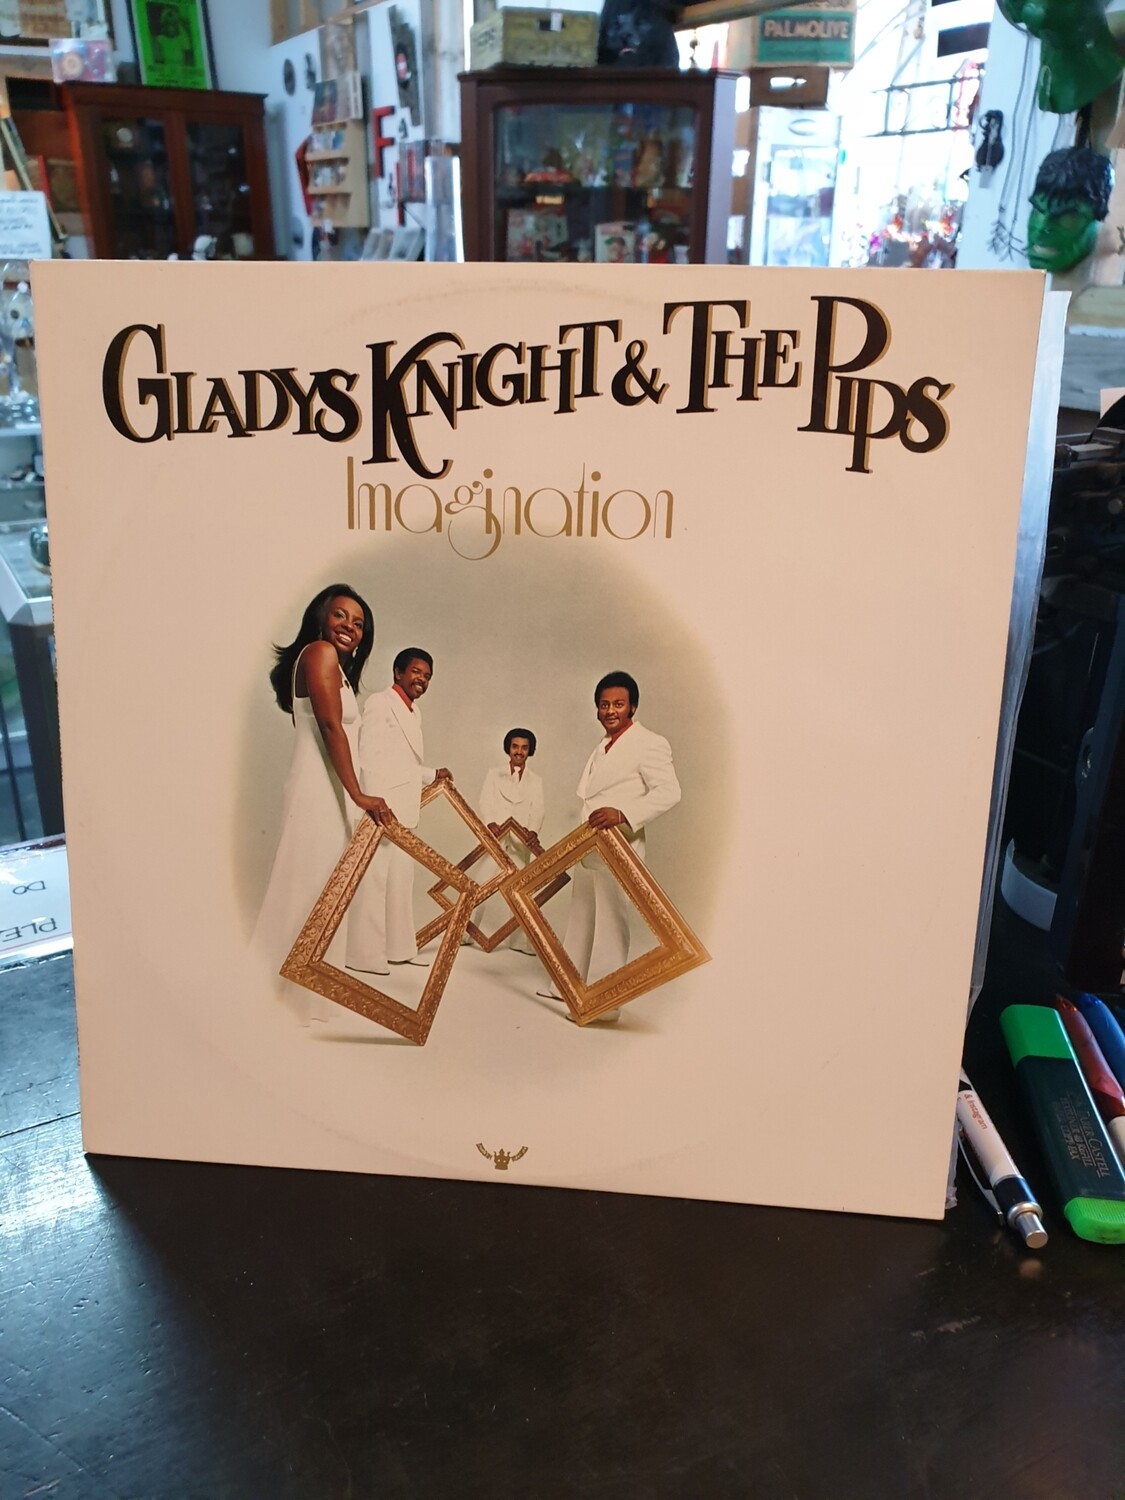 GLADYS KNIGHT & THE PIPS IMAGINATION